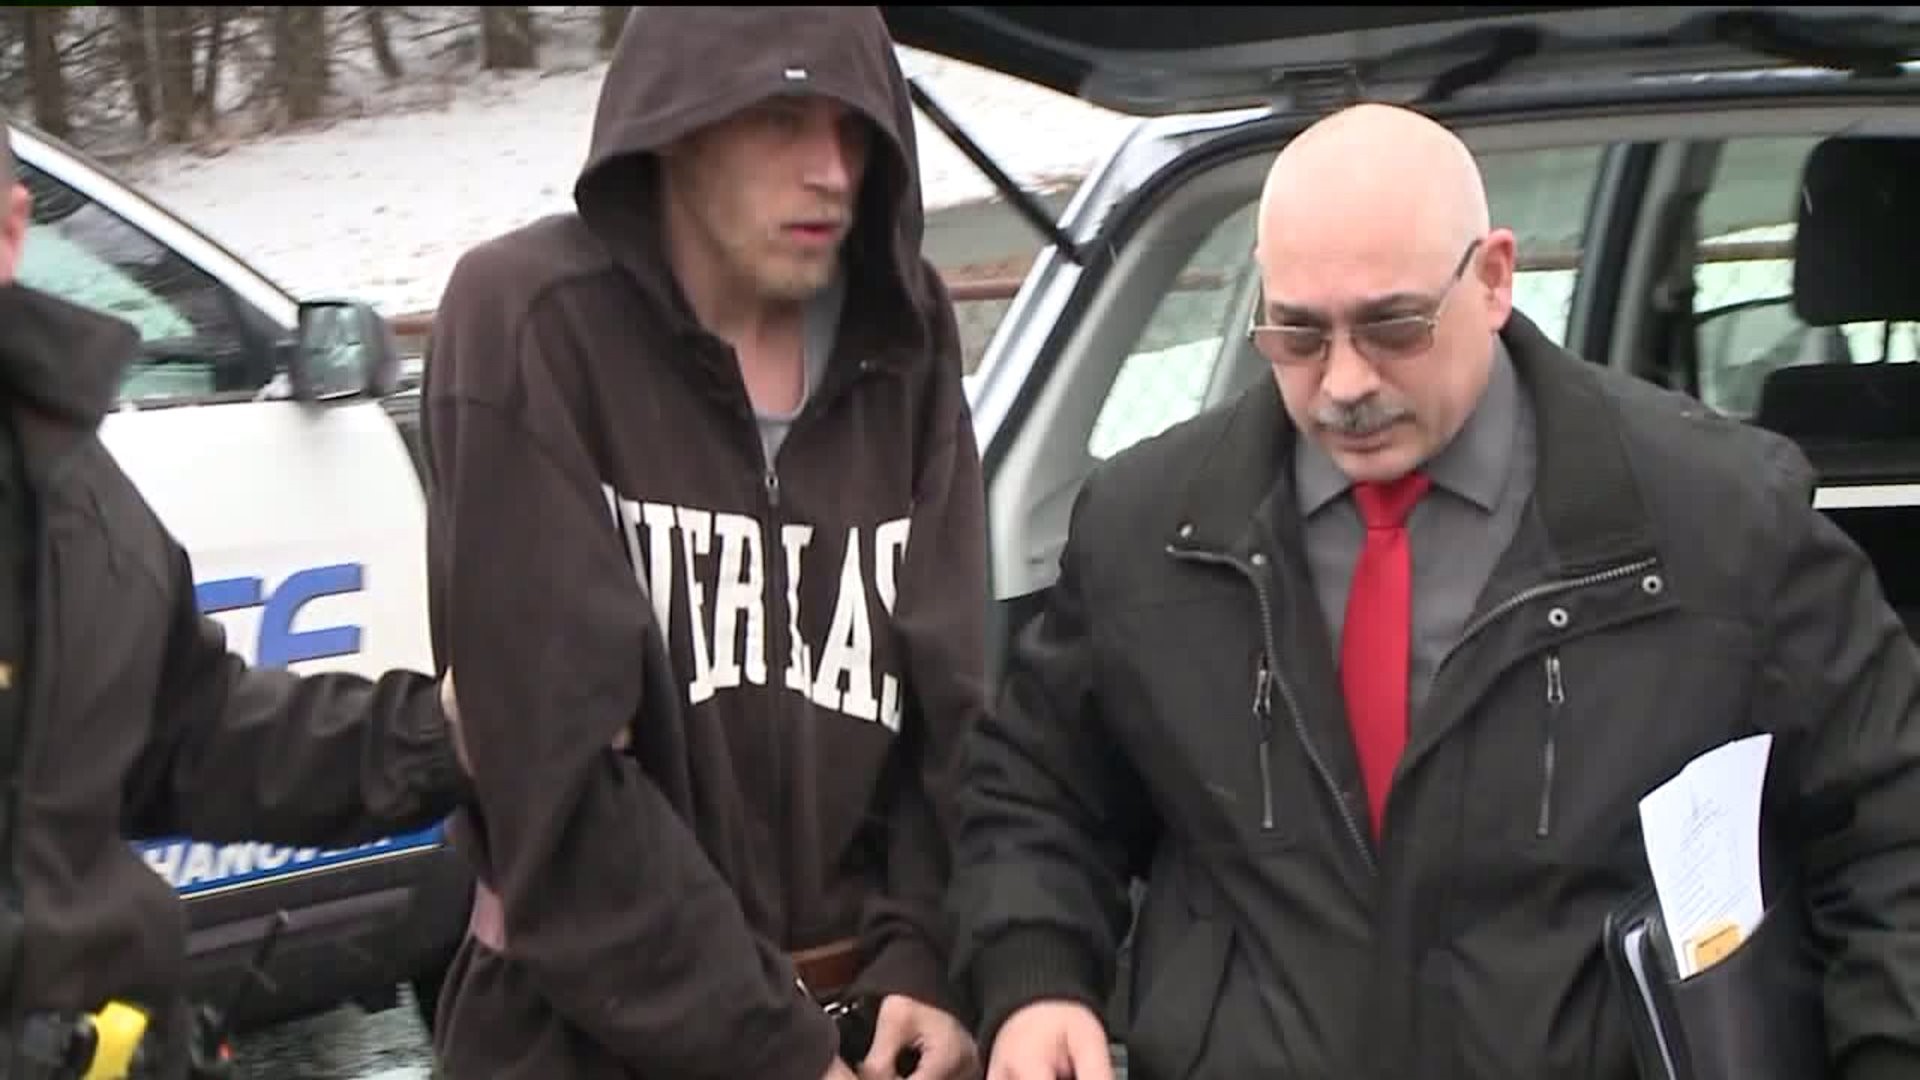 Guilty Plea to Deadly Stabbing in Luzerne County